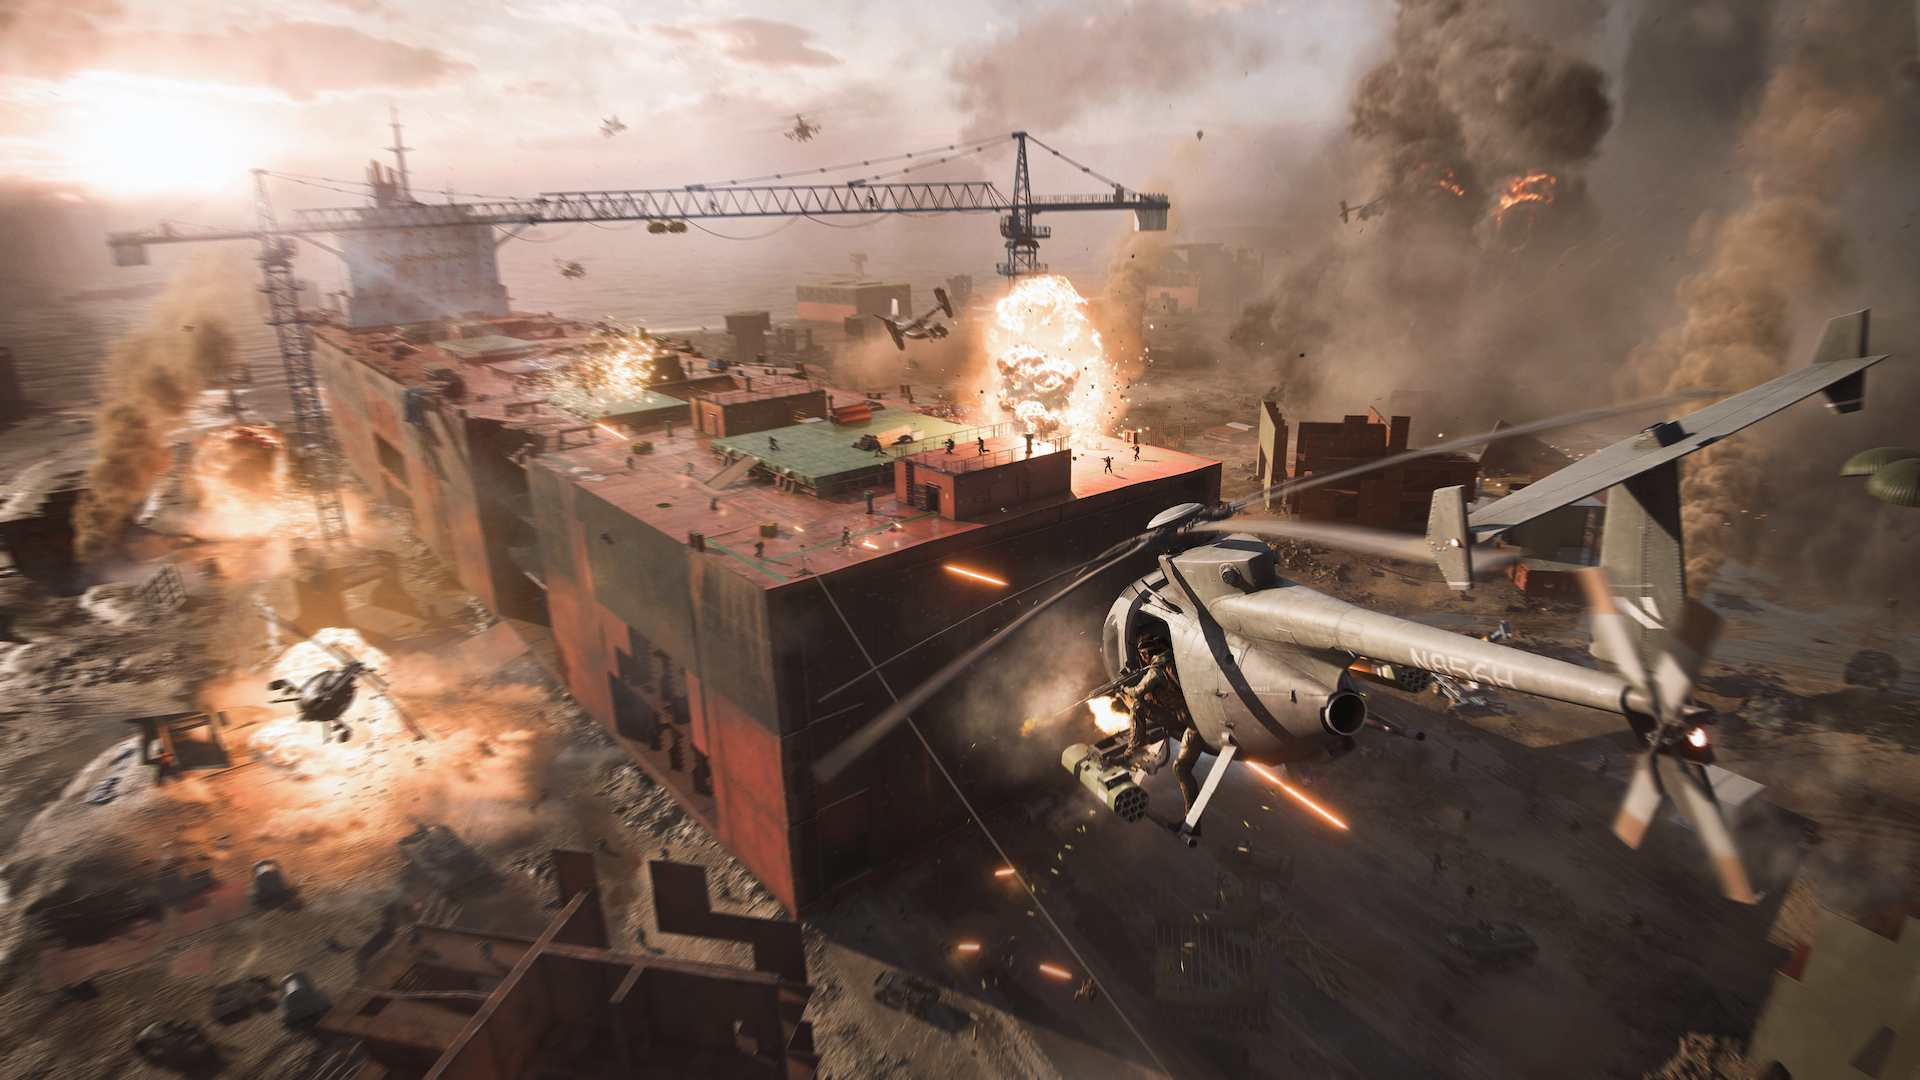 Call of Duty: Warzone review - A fix for the genre, but not a cure